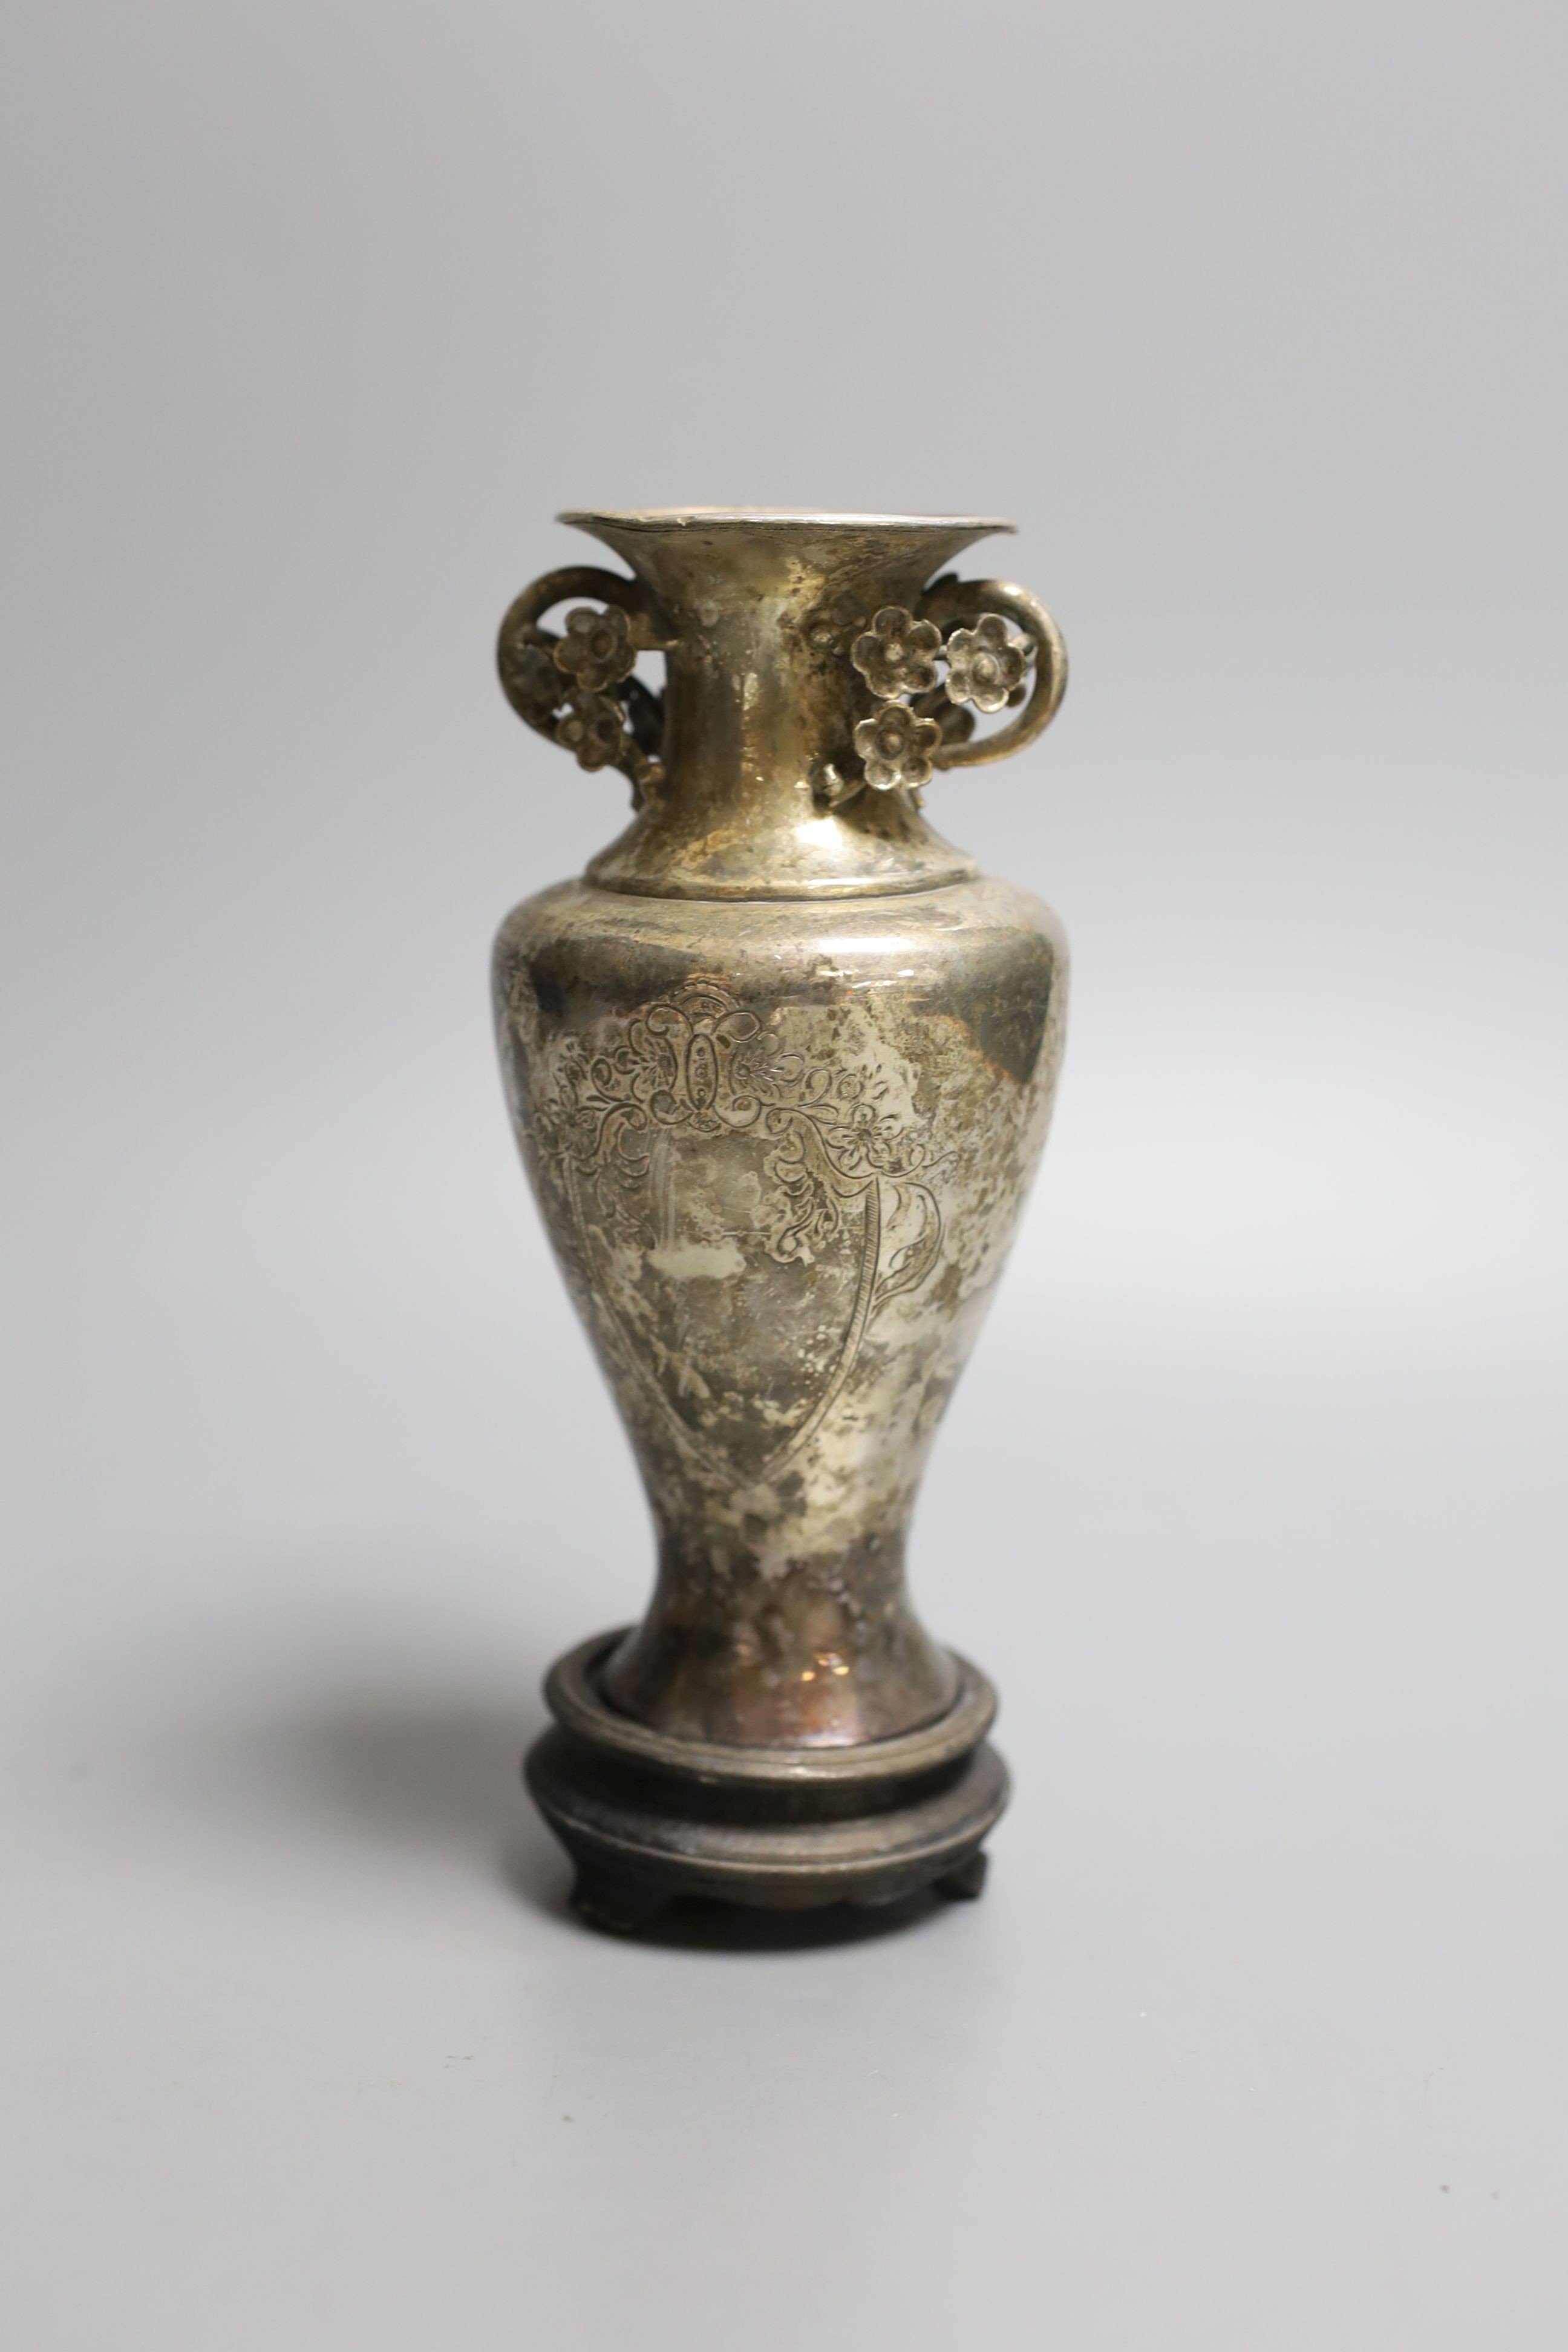 An early 20th century Chines engraved white metal two handled vase, on a wooden stand, vase 13.5cm.